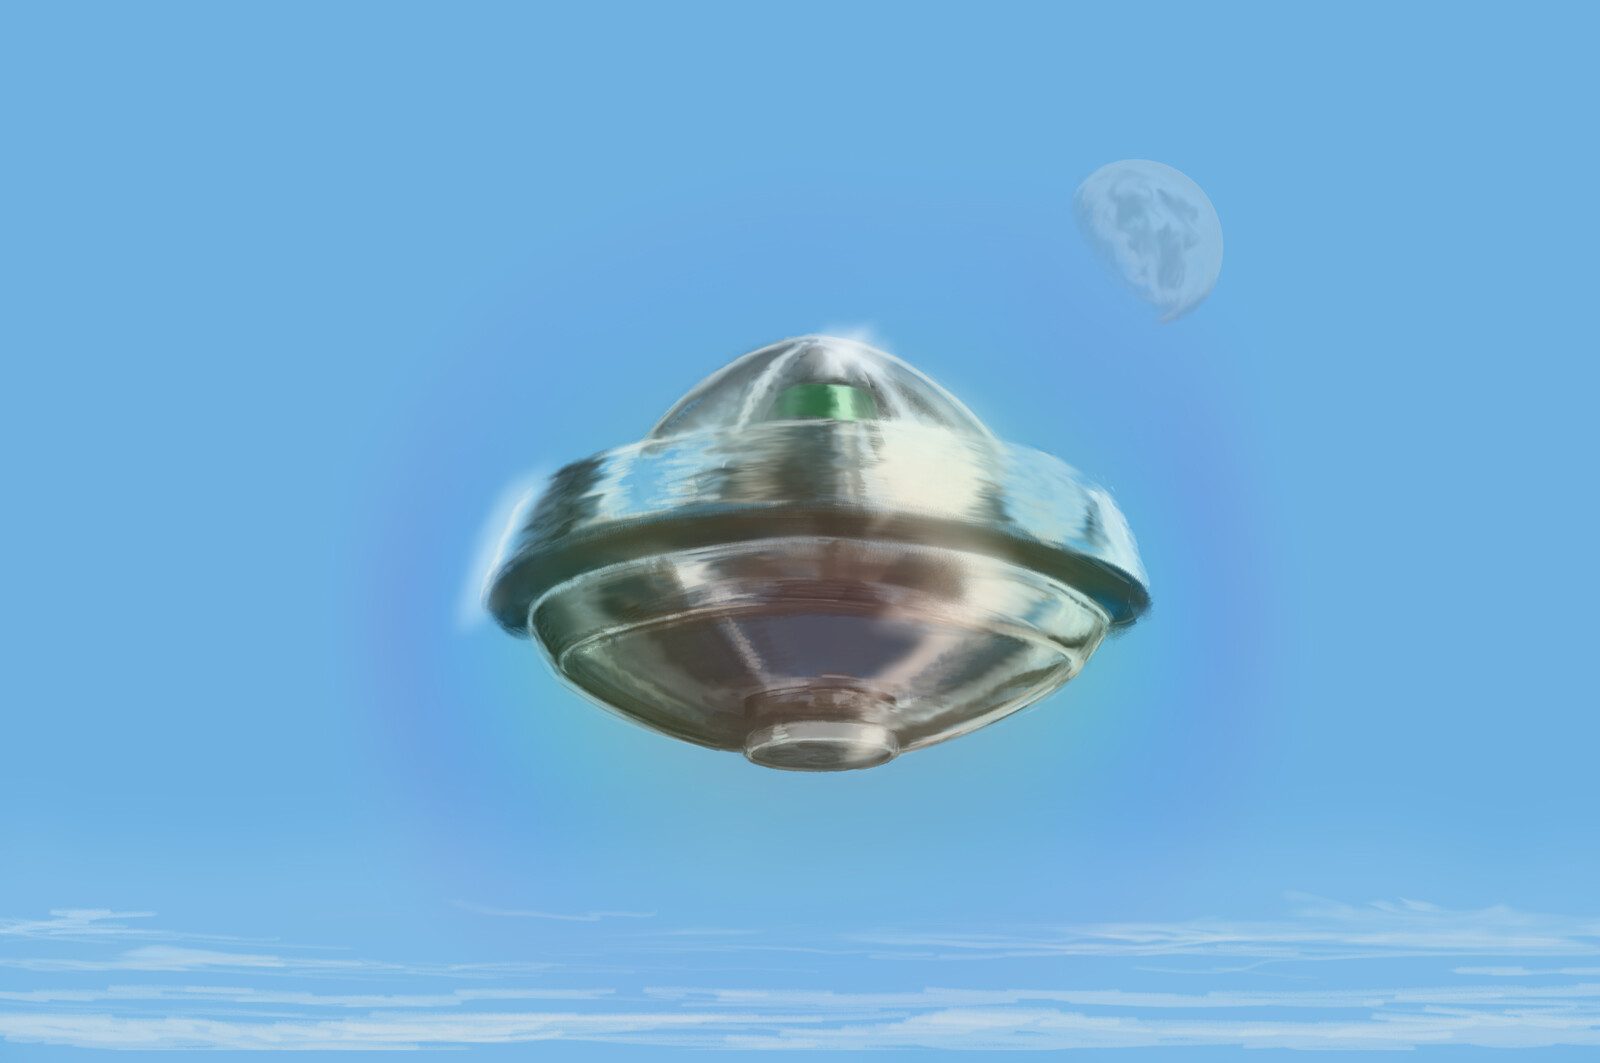 UFO
From the Gerry Anderson TV Series UFO. A thoroughly original take on a 'flying saucer', designed by series VFX Director Derek Meddings and  accompanied on screen by an unforgettable sound effect created  series Composer the great Barry Gray. Iconic.